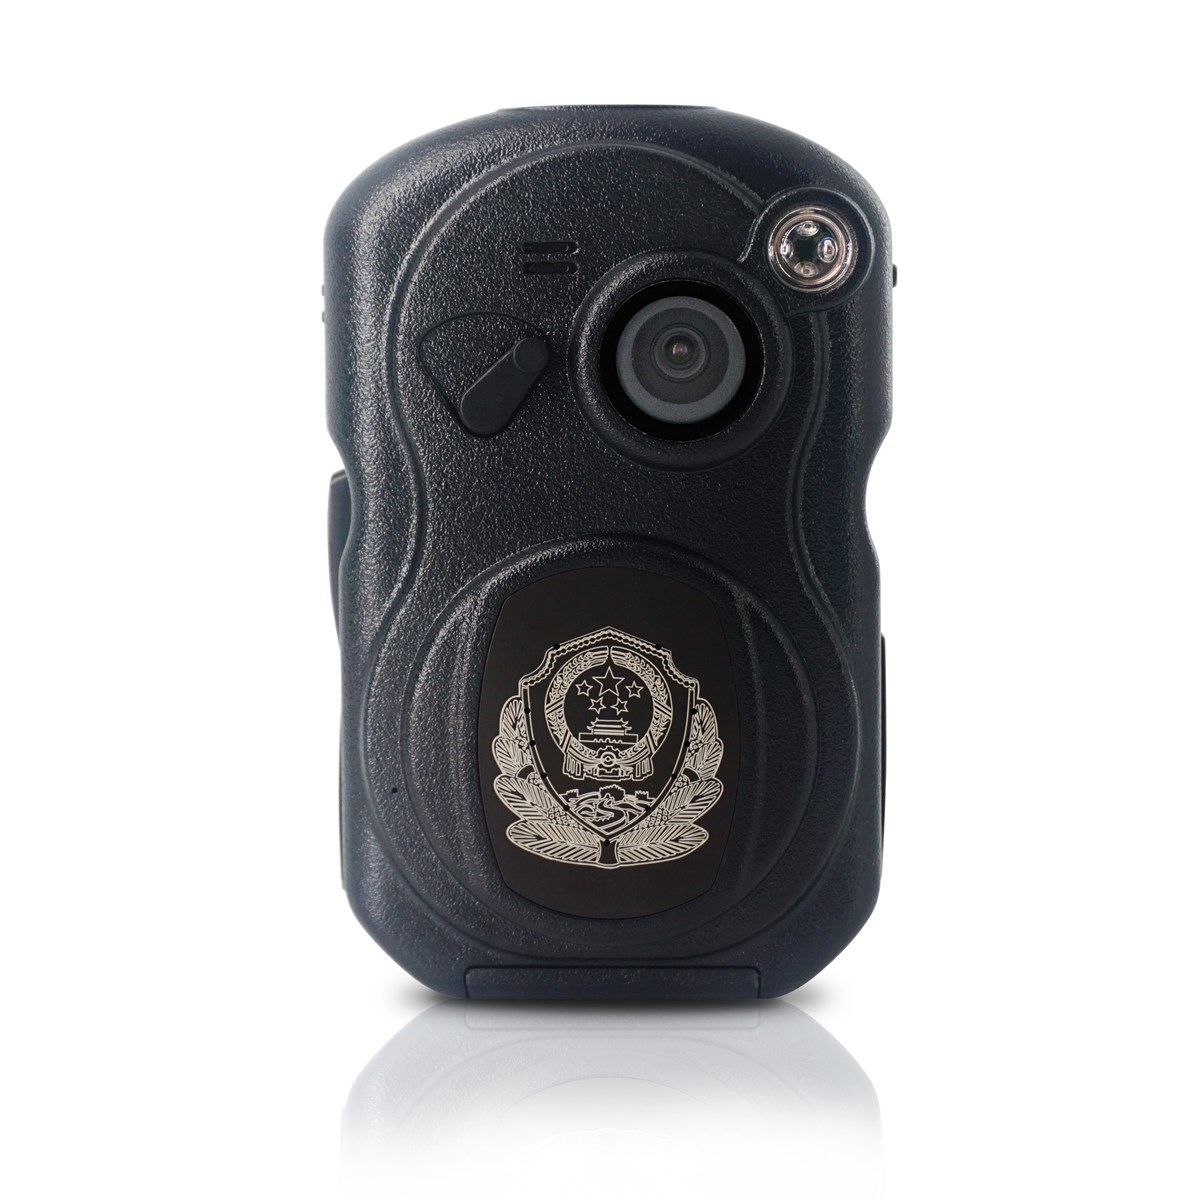 ONETHINGCAM DSGHD the Smallest 3G Portable Camera For Security Police Camera HD 1080P 30fps 170 Degree Wide Angle Lens